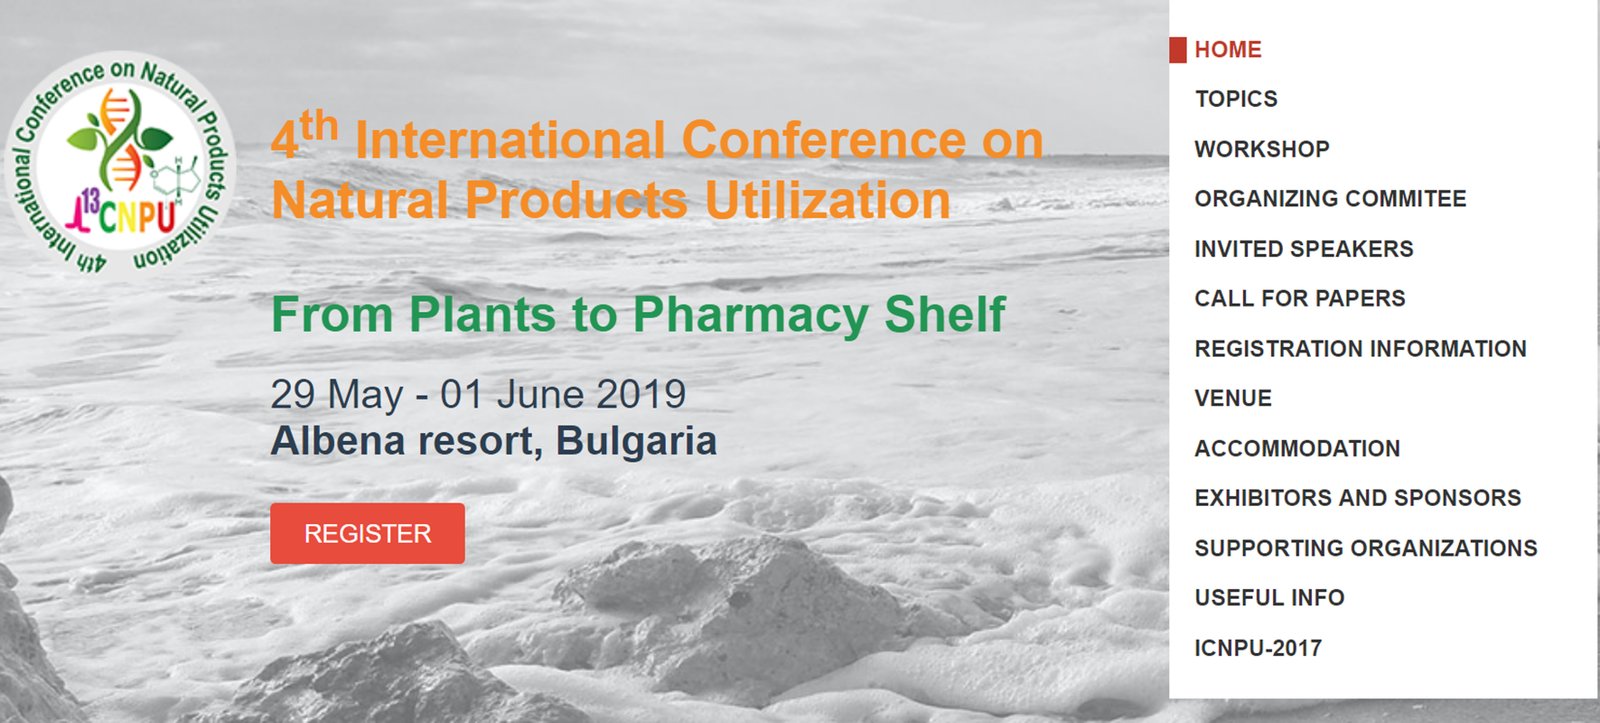 ICNPU-2019 4th International Conference on Natural Products Utilization From Plants to Pharmacy Shelf, supported by INPST